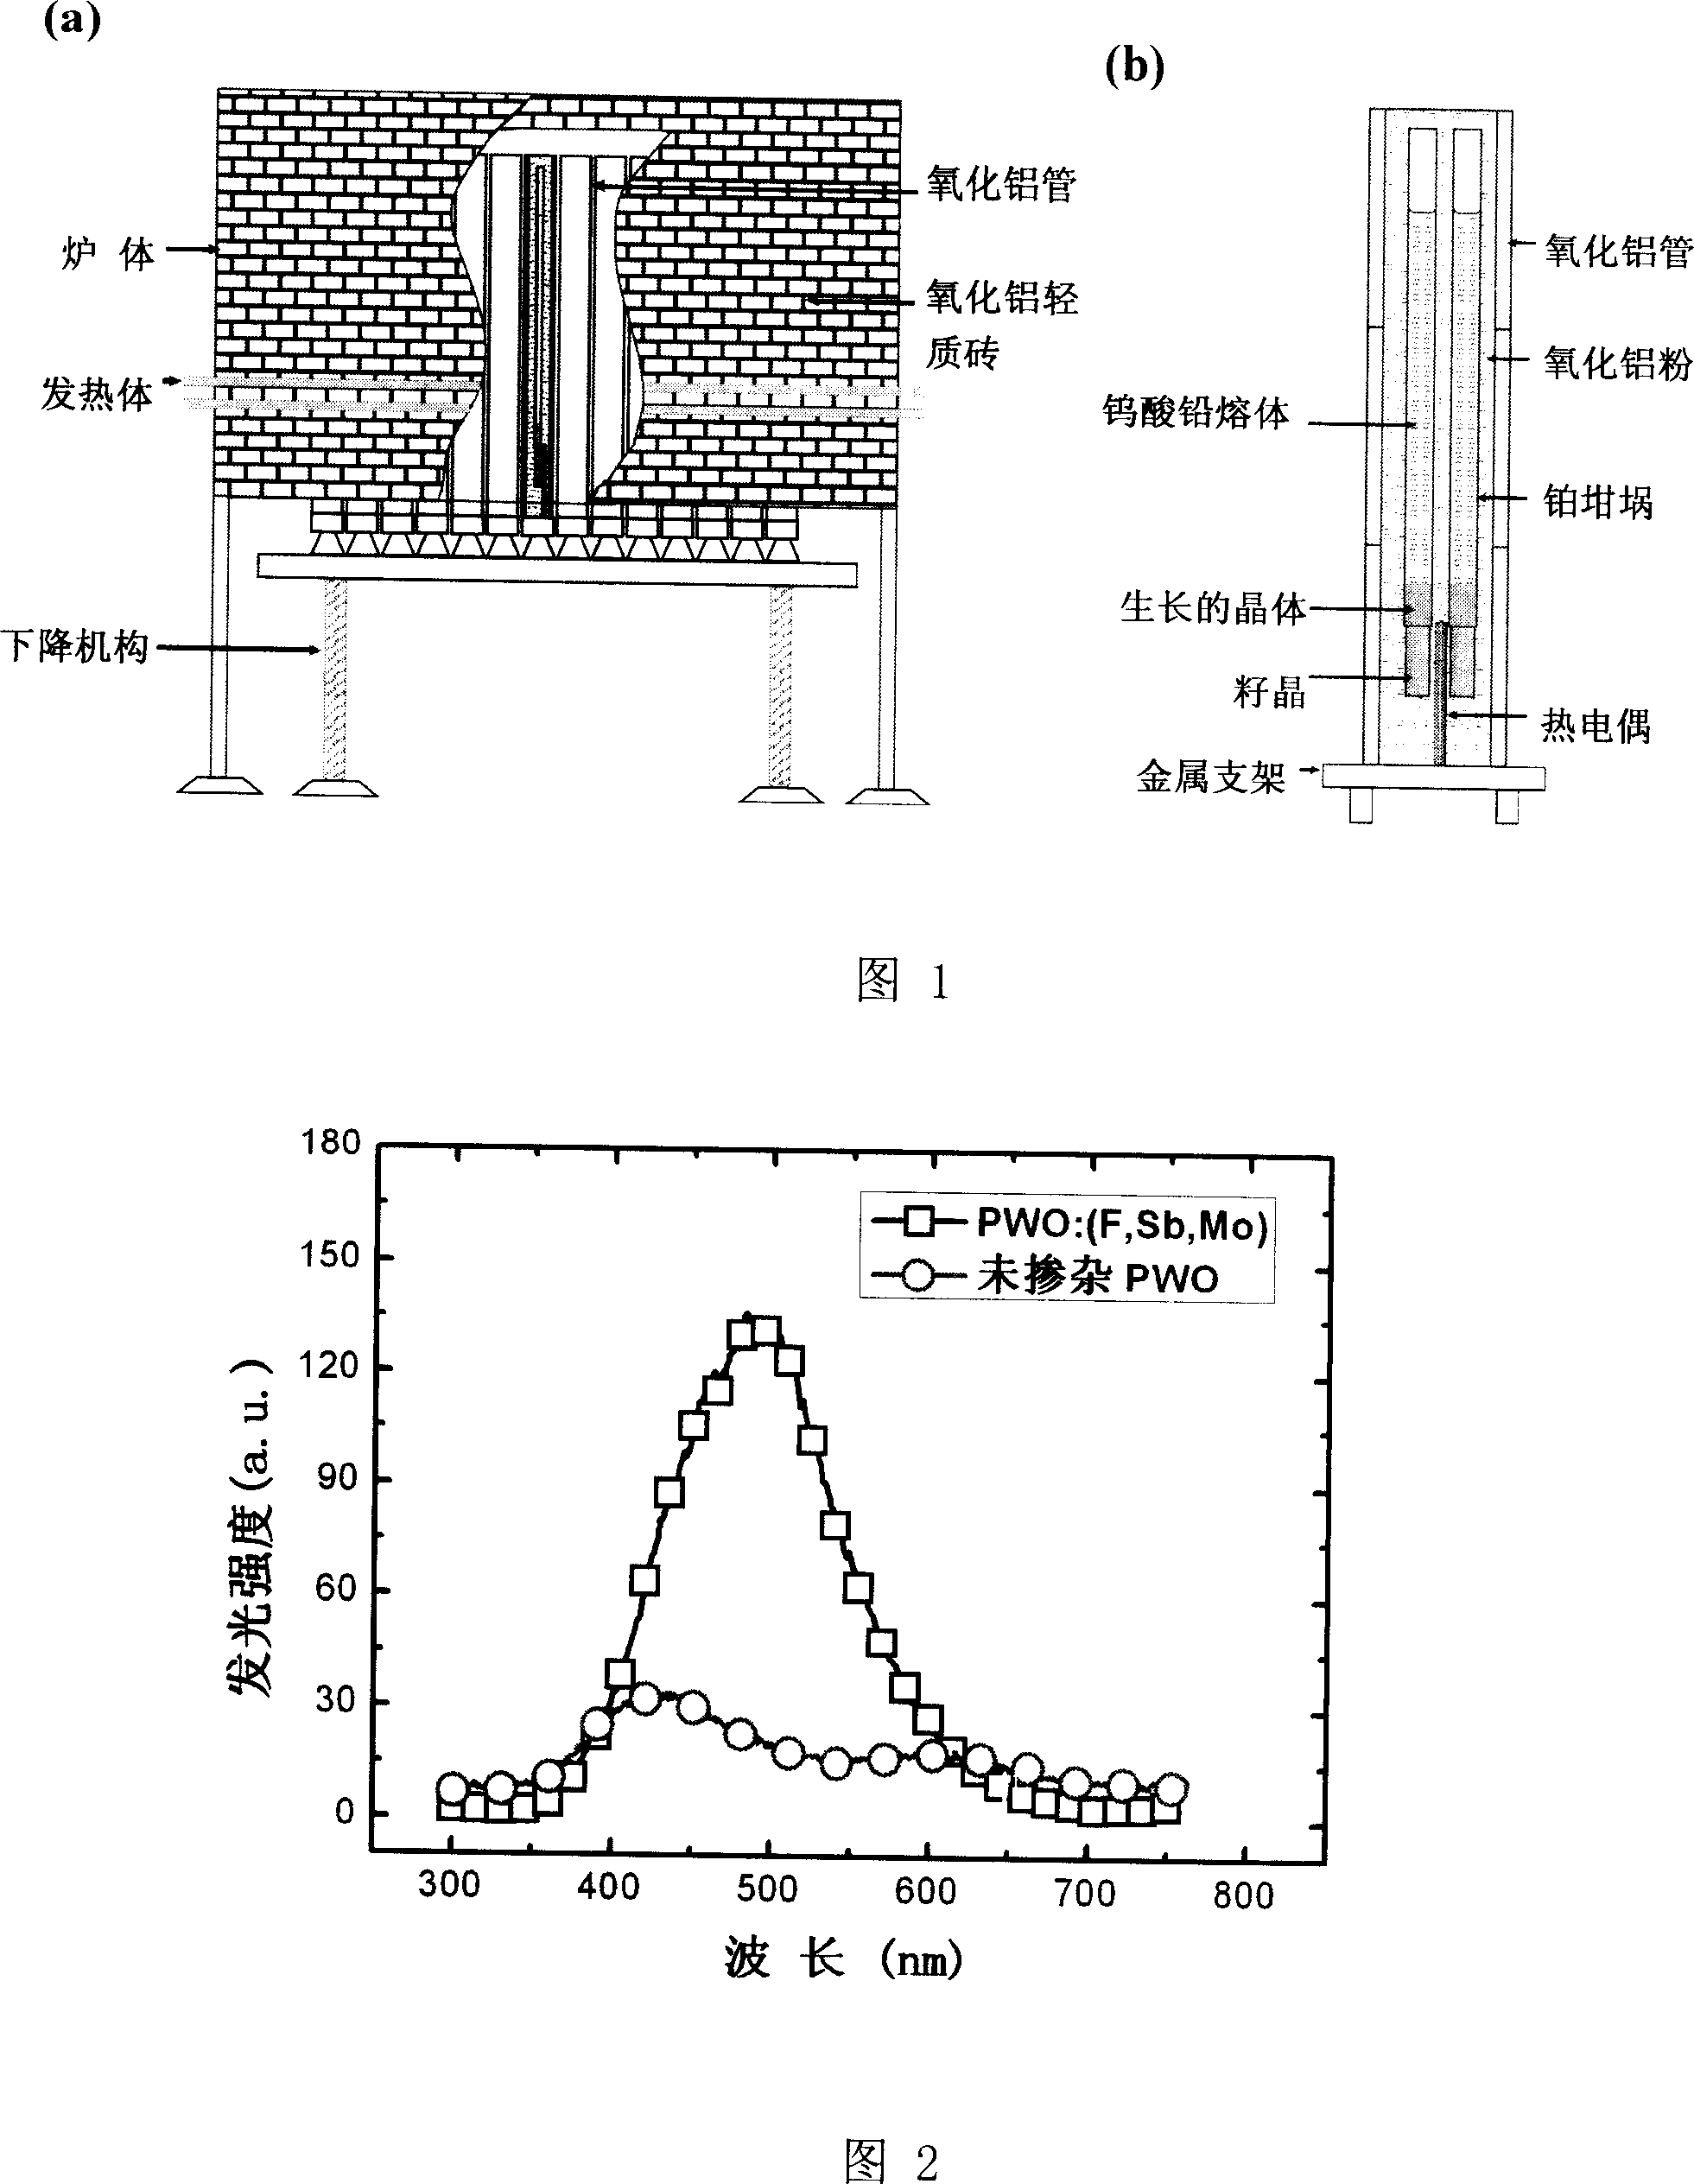 Combined different valence ions doped crystal of lead tungstate with high light yield, and prepartion method